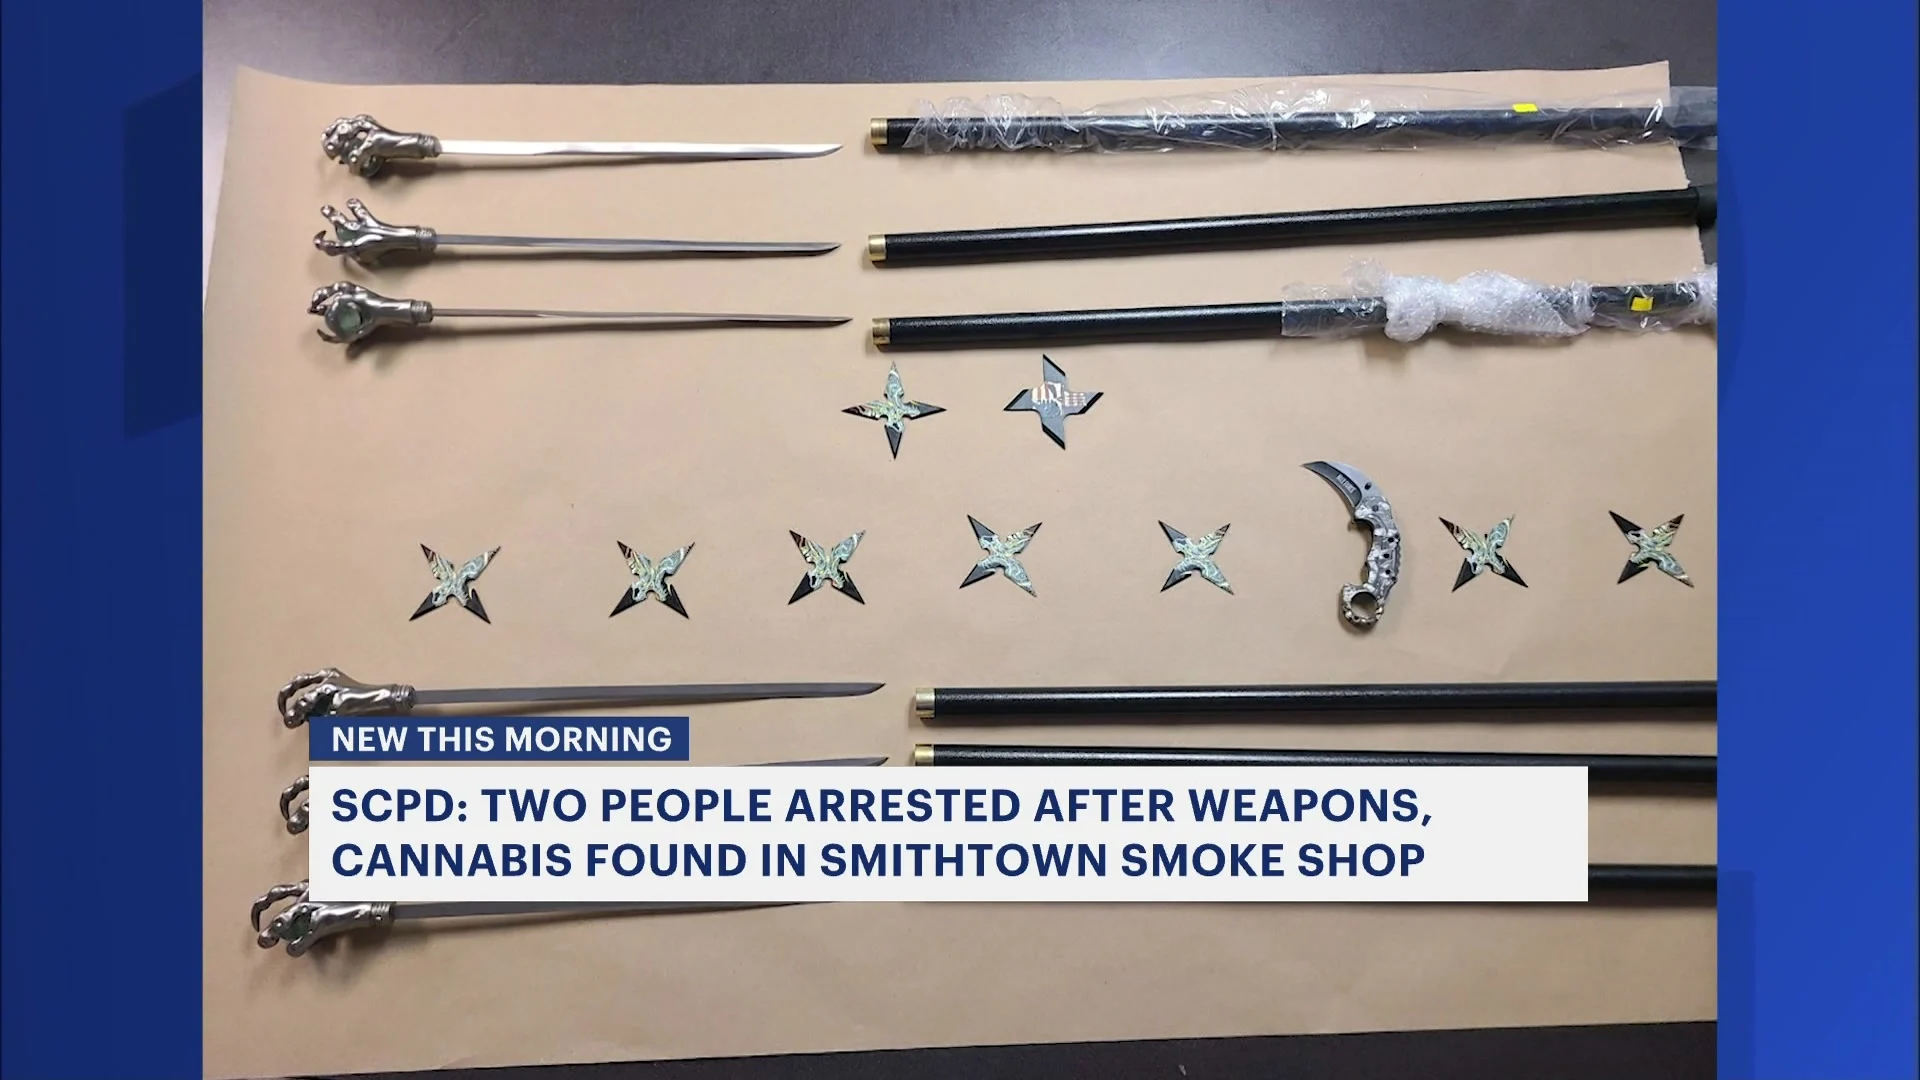 Police: 2 people arrested after weapons, cannabis found in Smithtown smoke shop